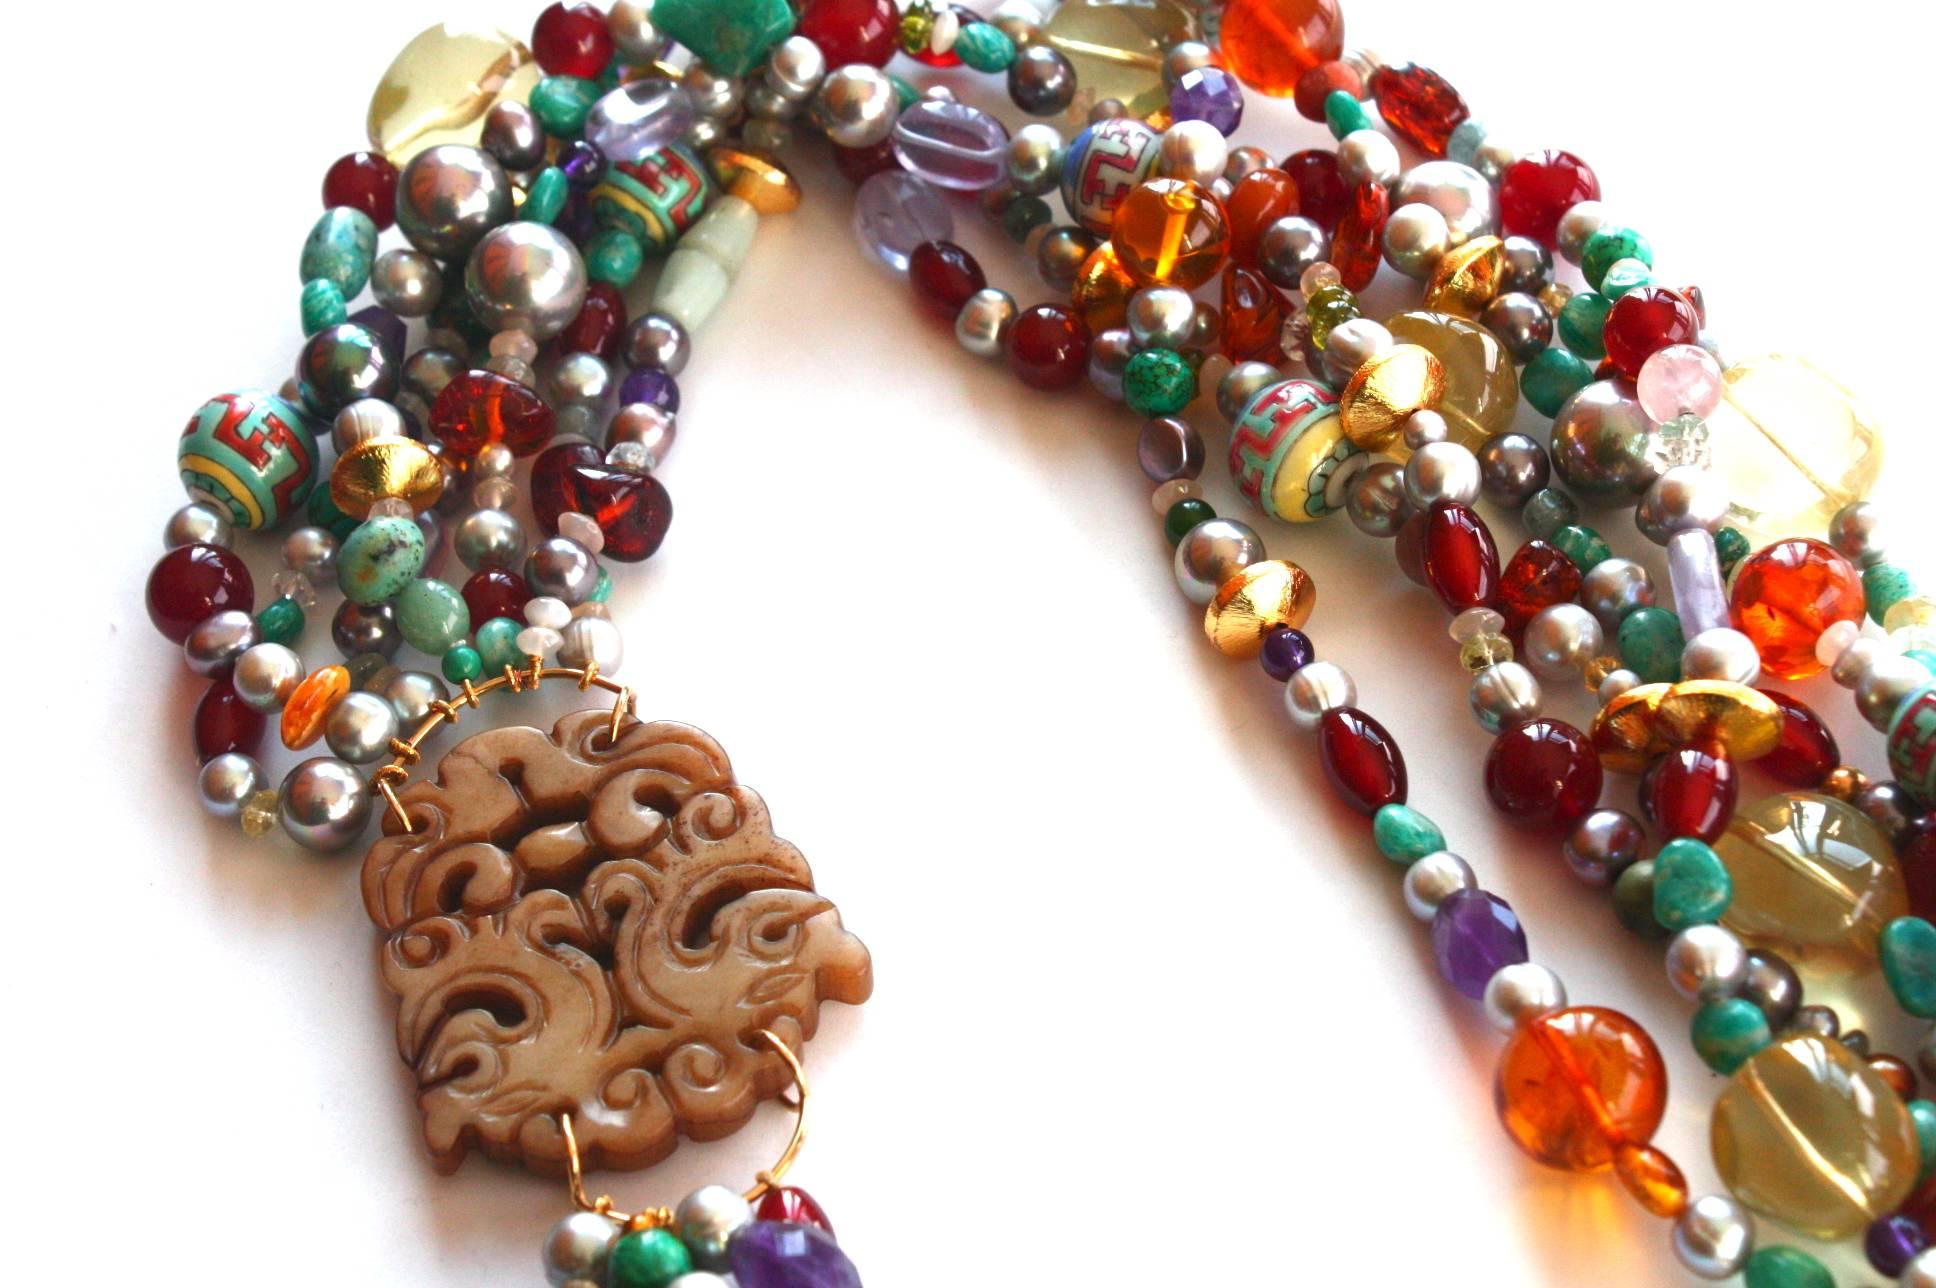 Very special long necklace with to dragon carved jade plaque, antiques Chinese murrine, amber, amethyst, jade, Citrine, carnelian. total length 110cm.
All Giulia Colussi jewelry is new and has never been previously owned or worn. Each item will